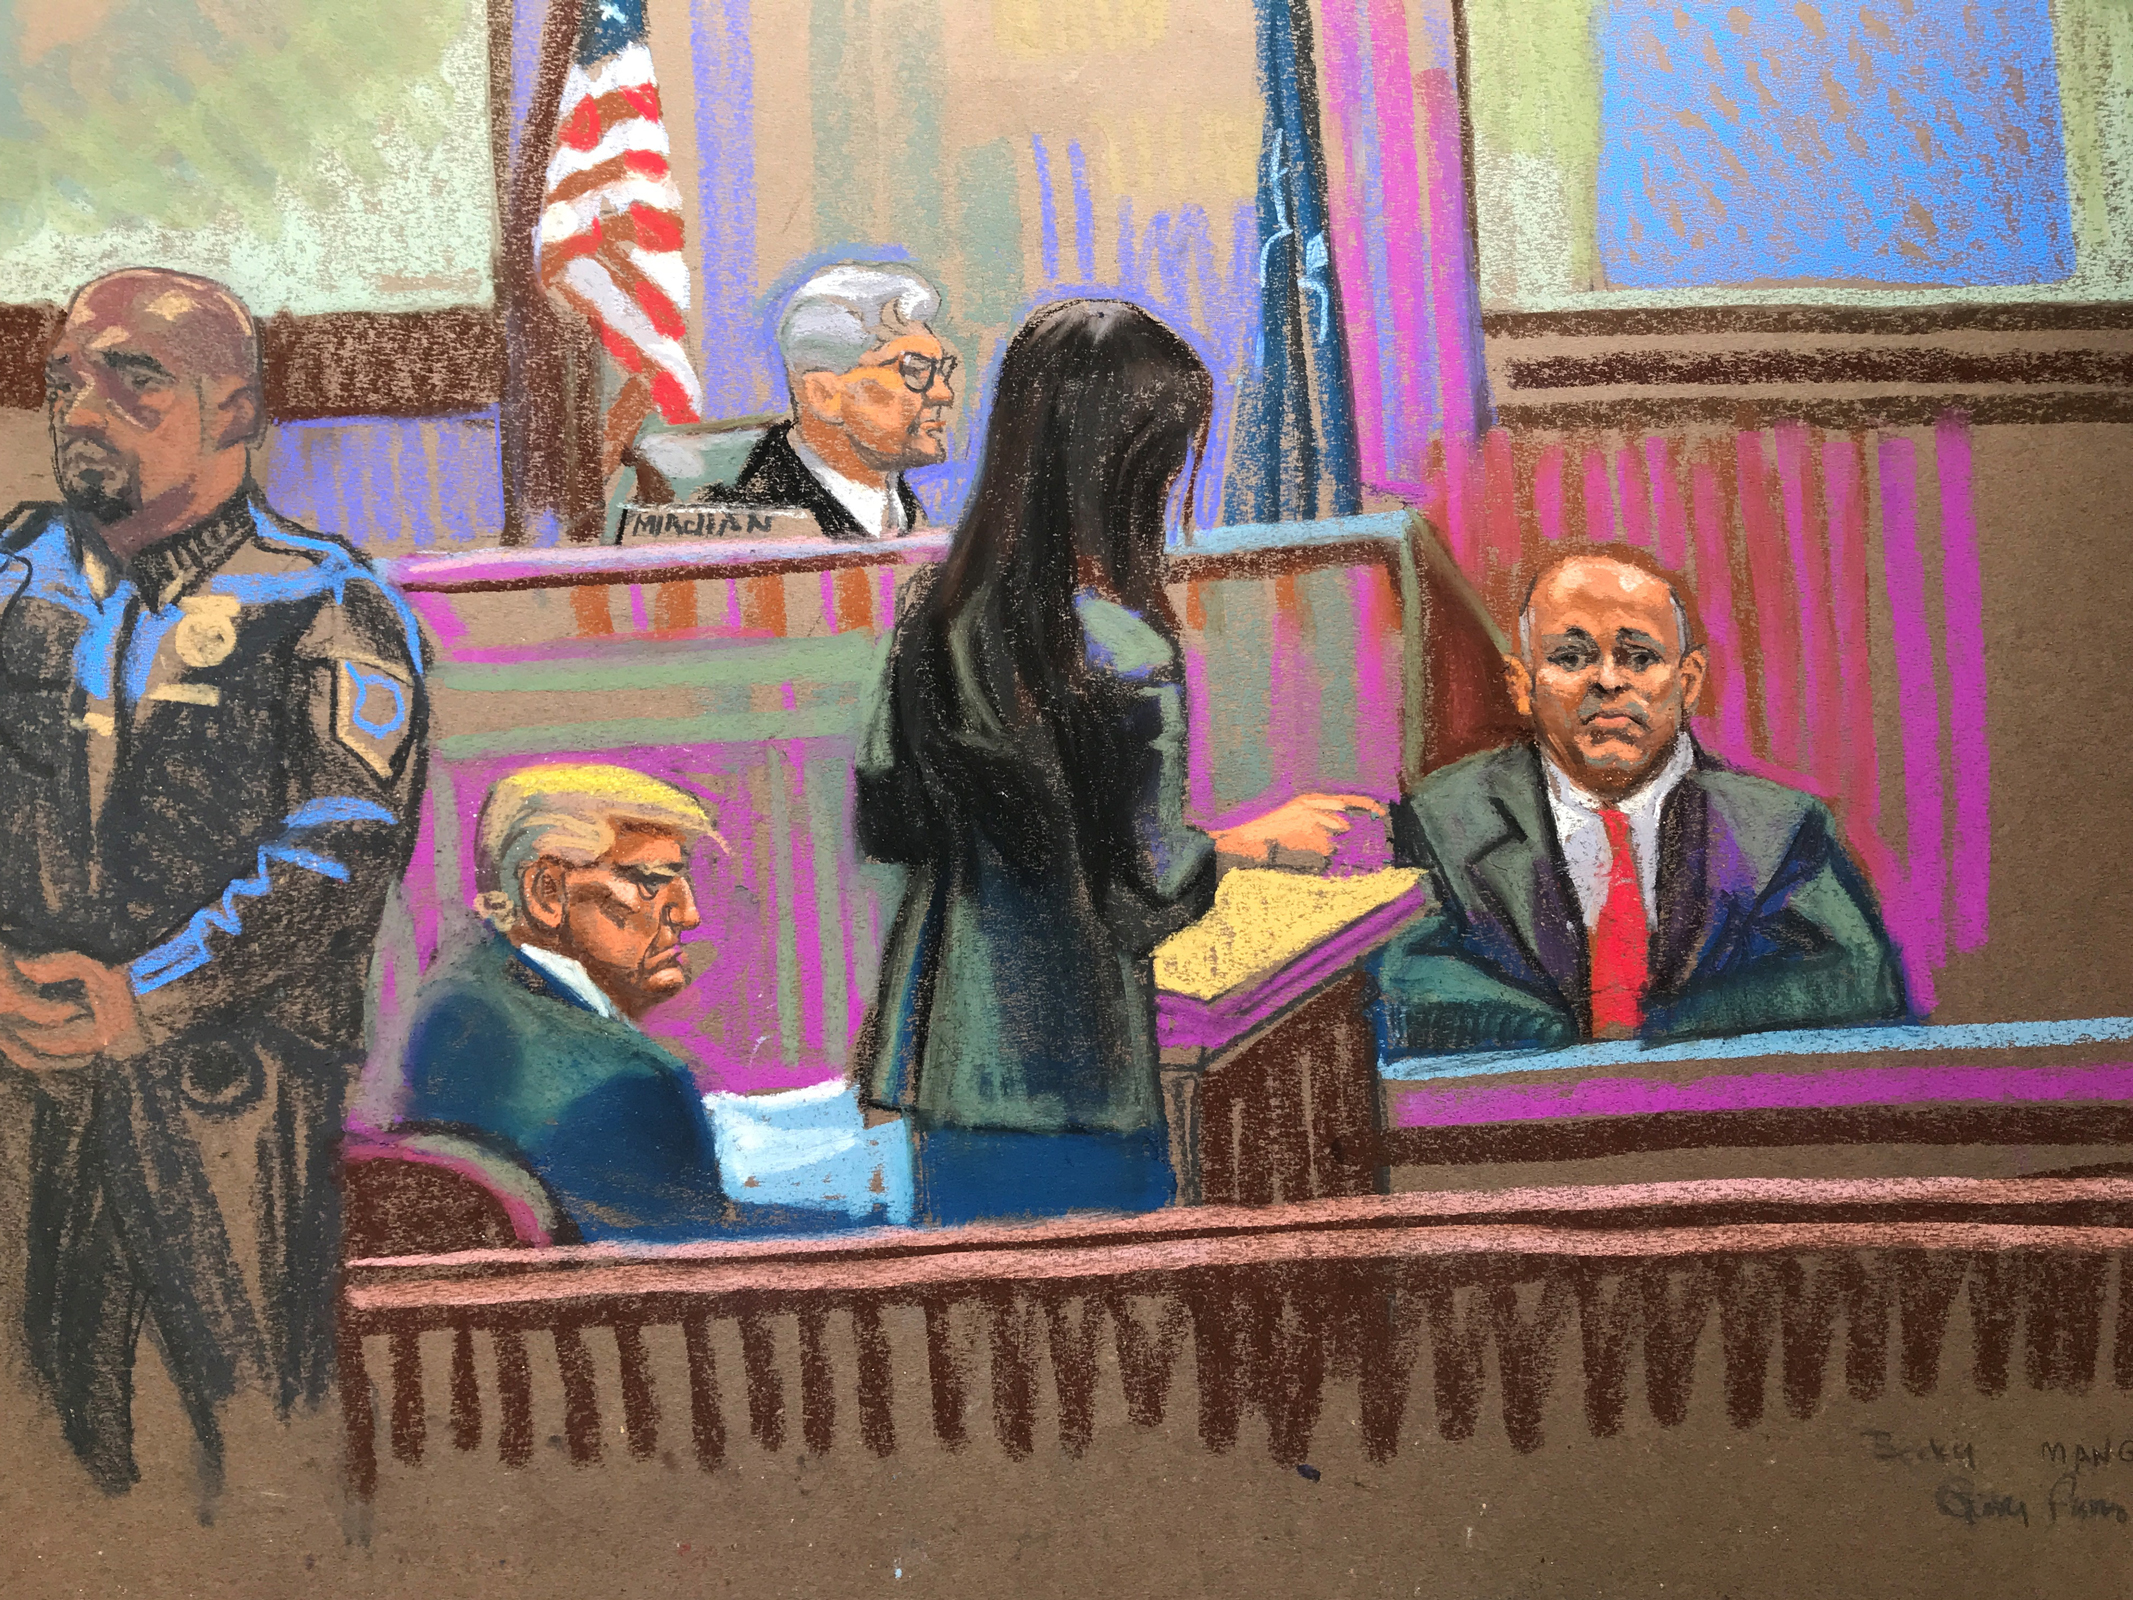 Michael Cohen's former banker Gary Farro testifying on the stand on April 30 in New York.